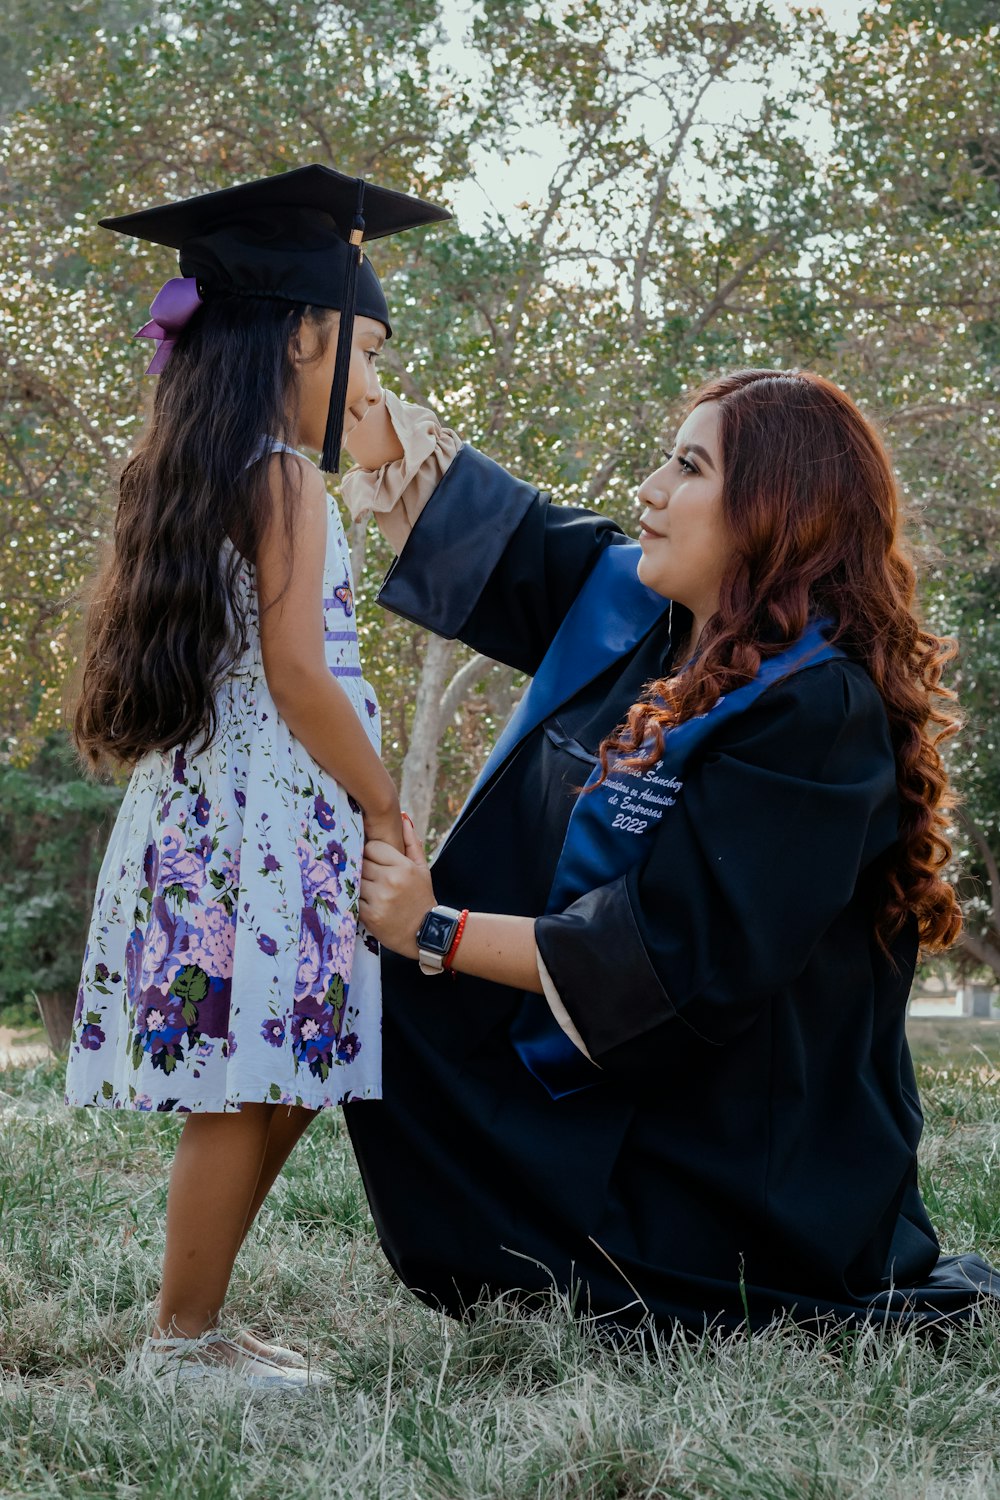 a woman in a graduation gown and cap next to a girl in a dress